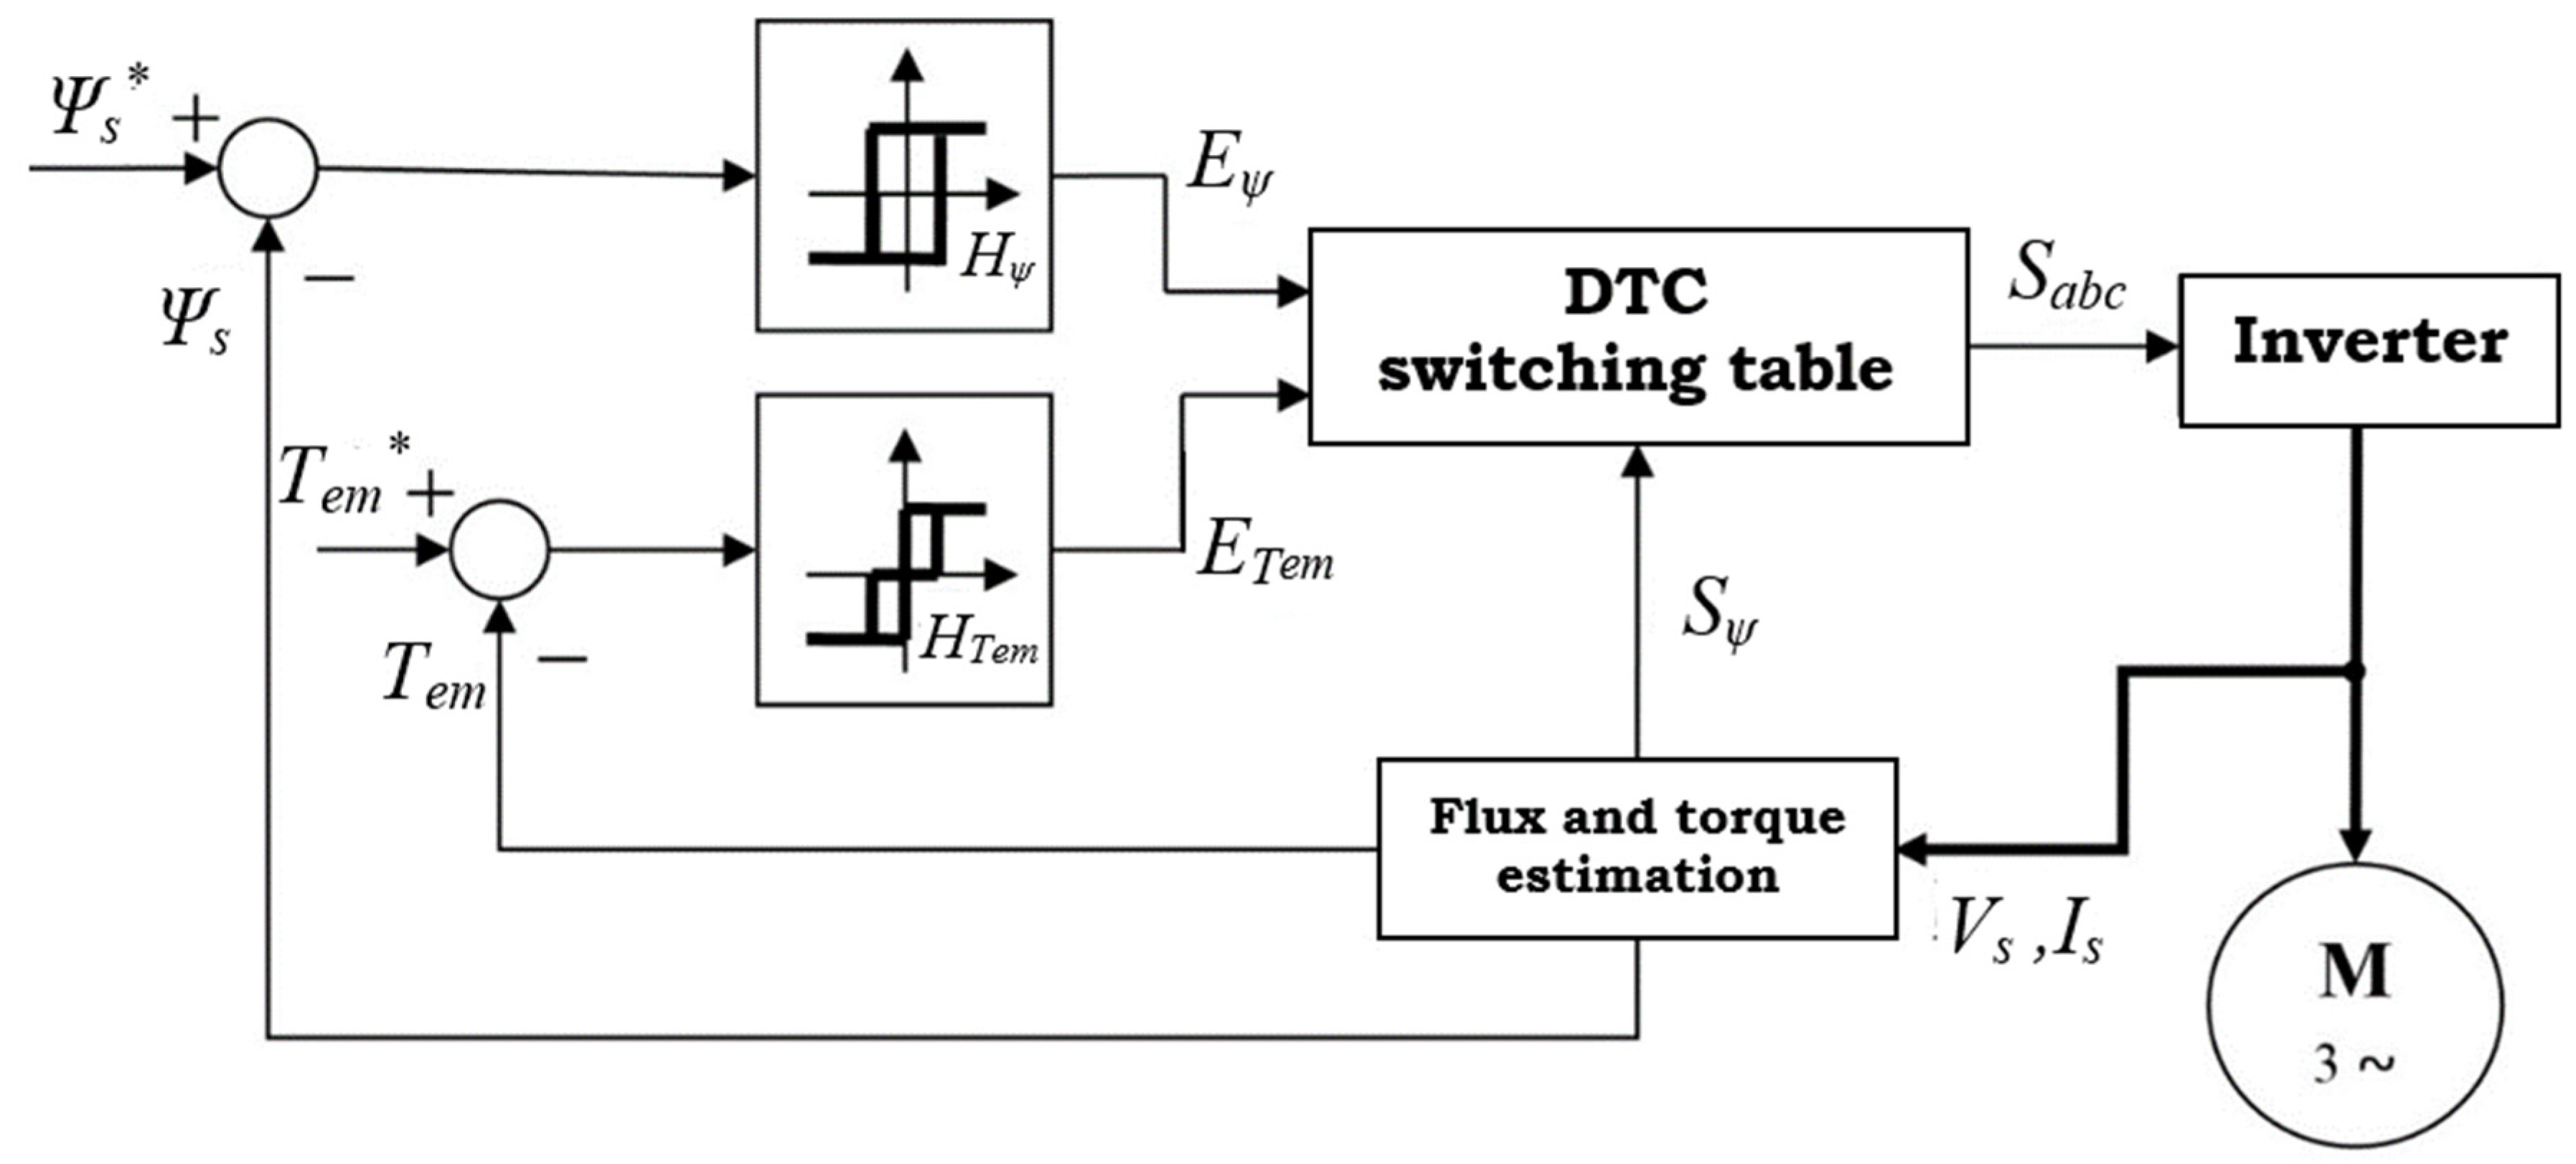 Energies | Free Full-Text | Induction Motor Direct Torque Control with  Synchronous PWM